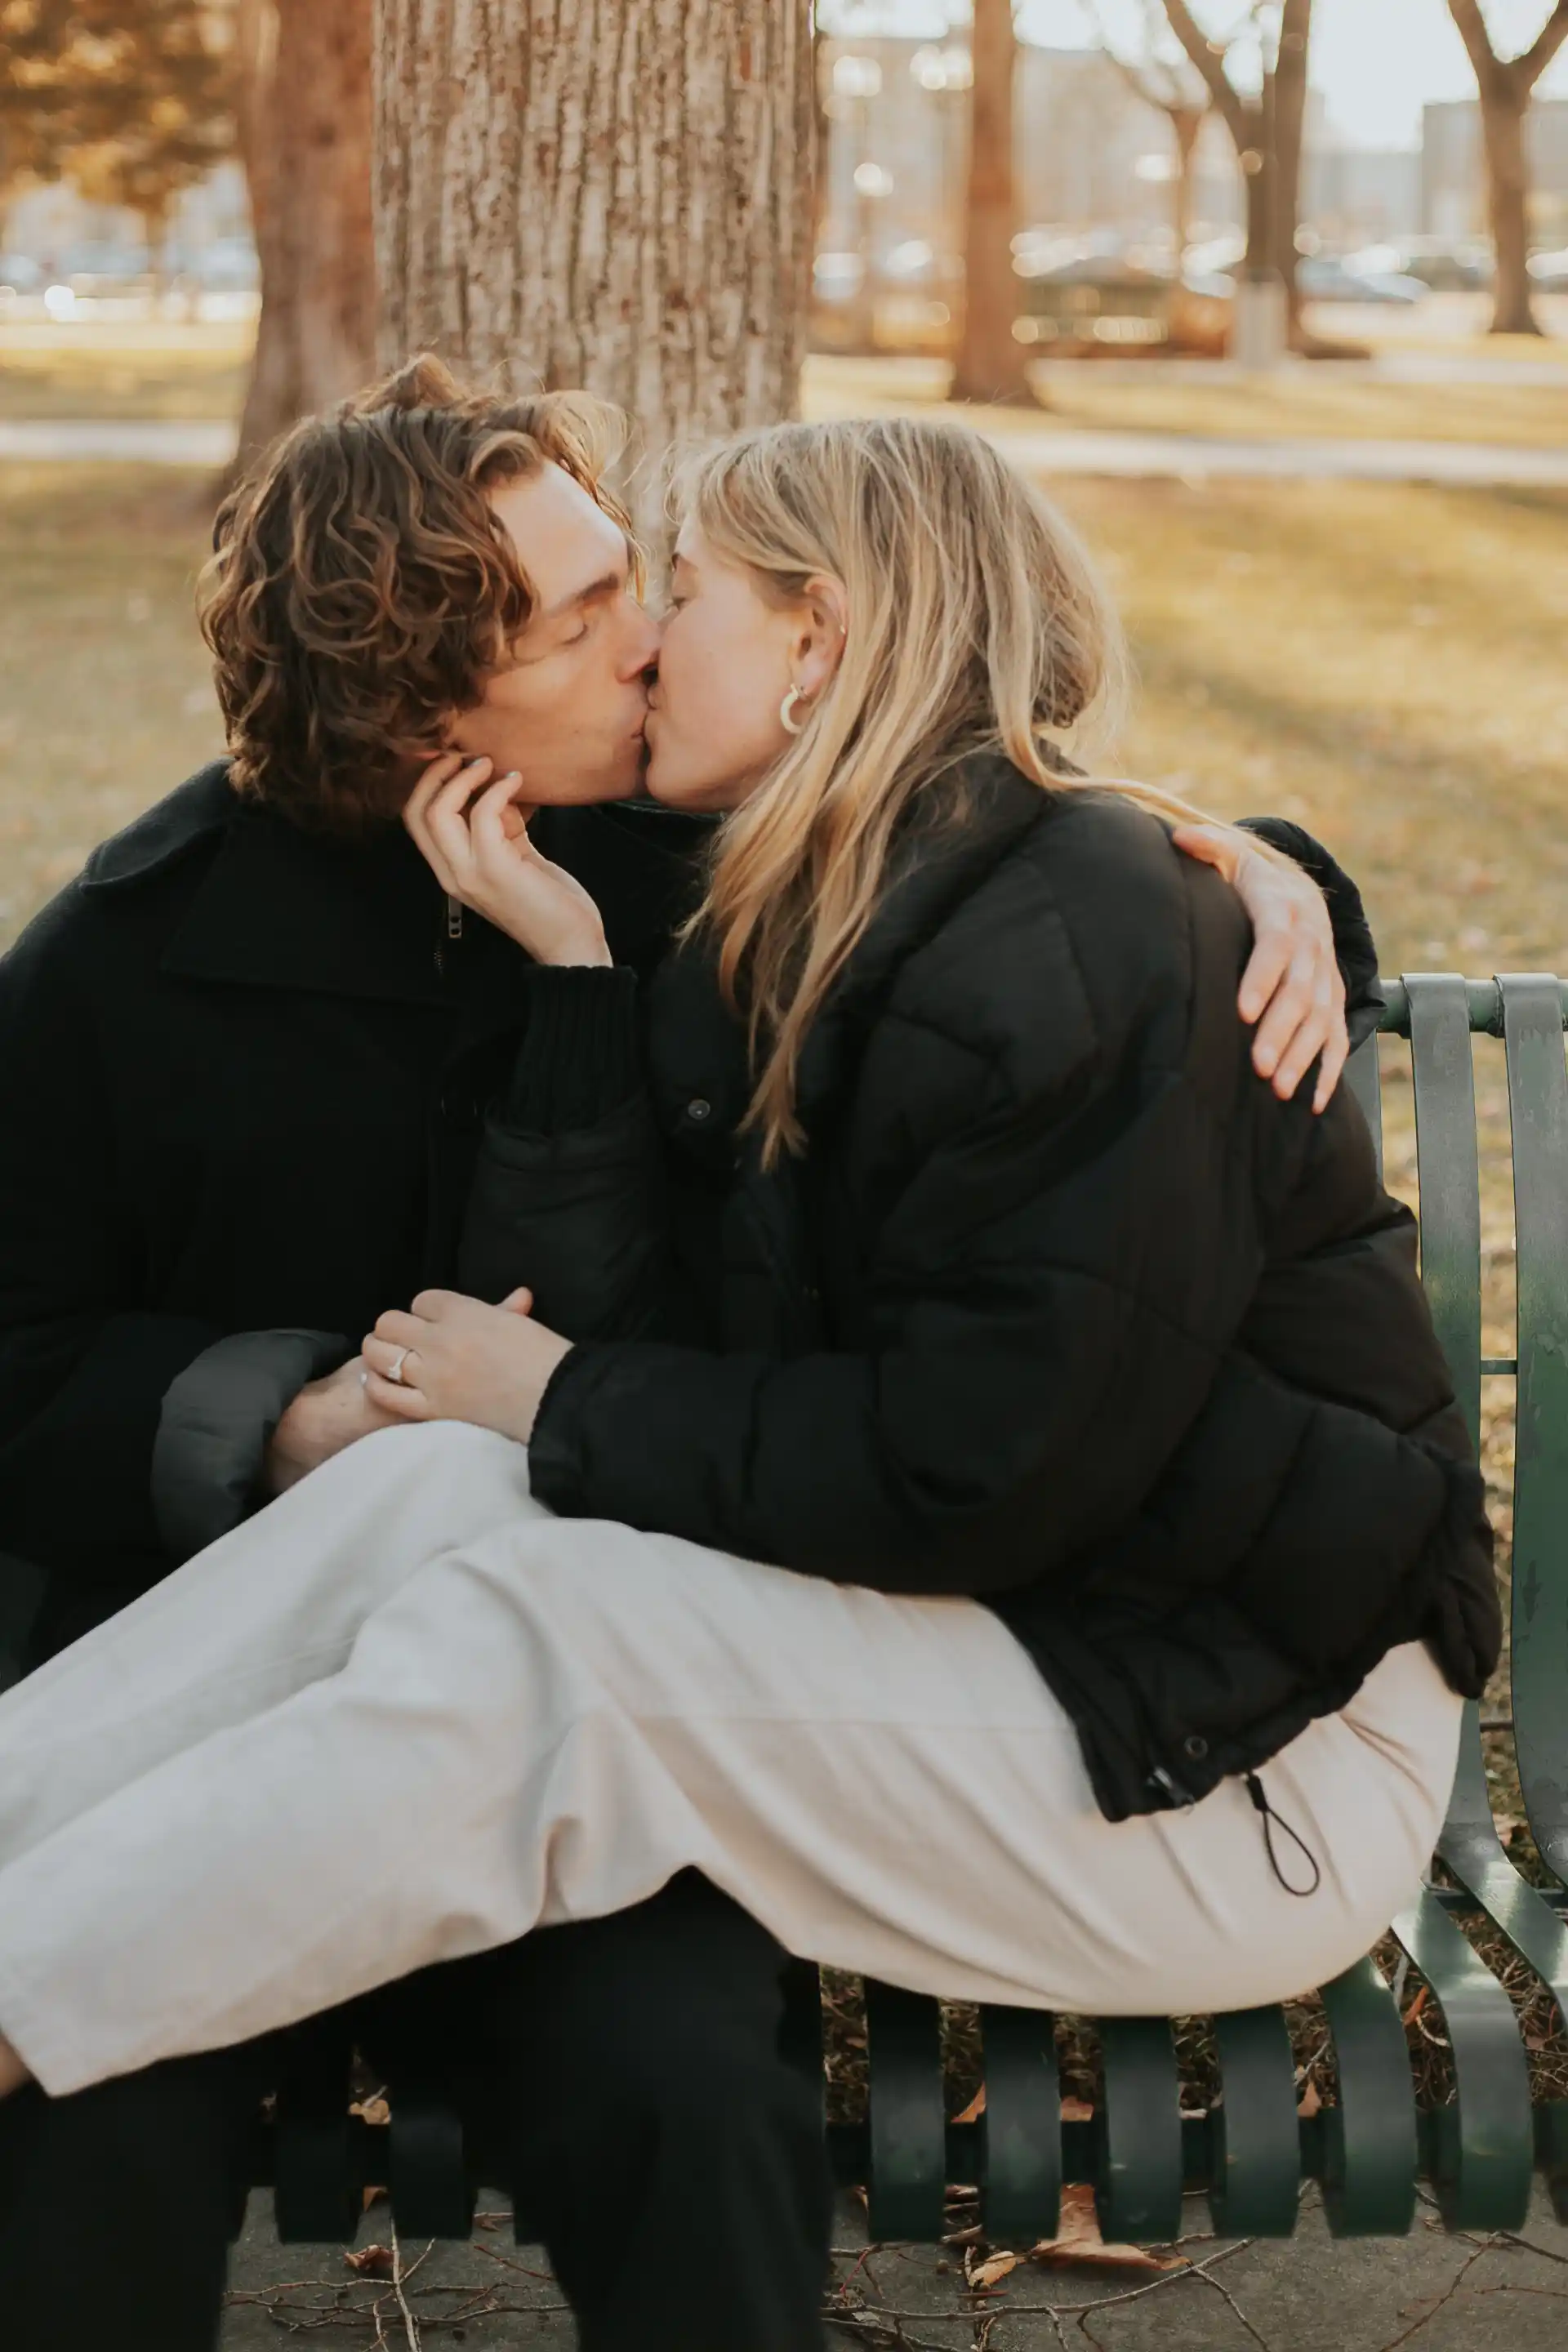 Boy and girl kissing on a park bench